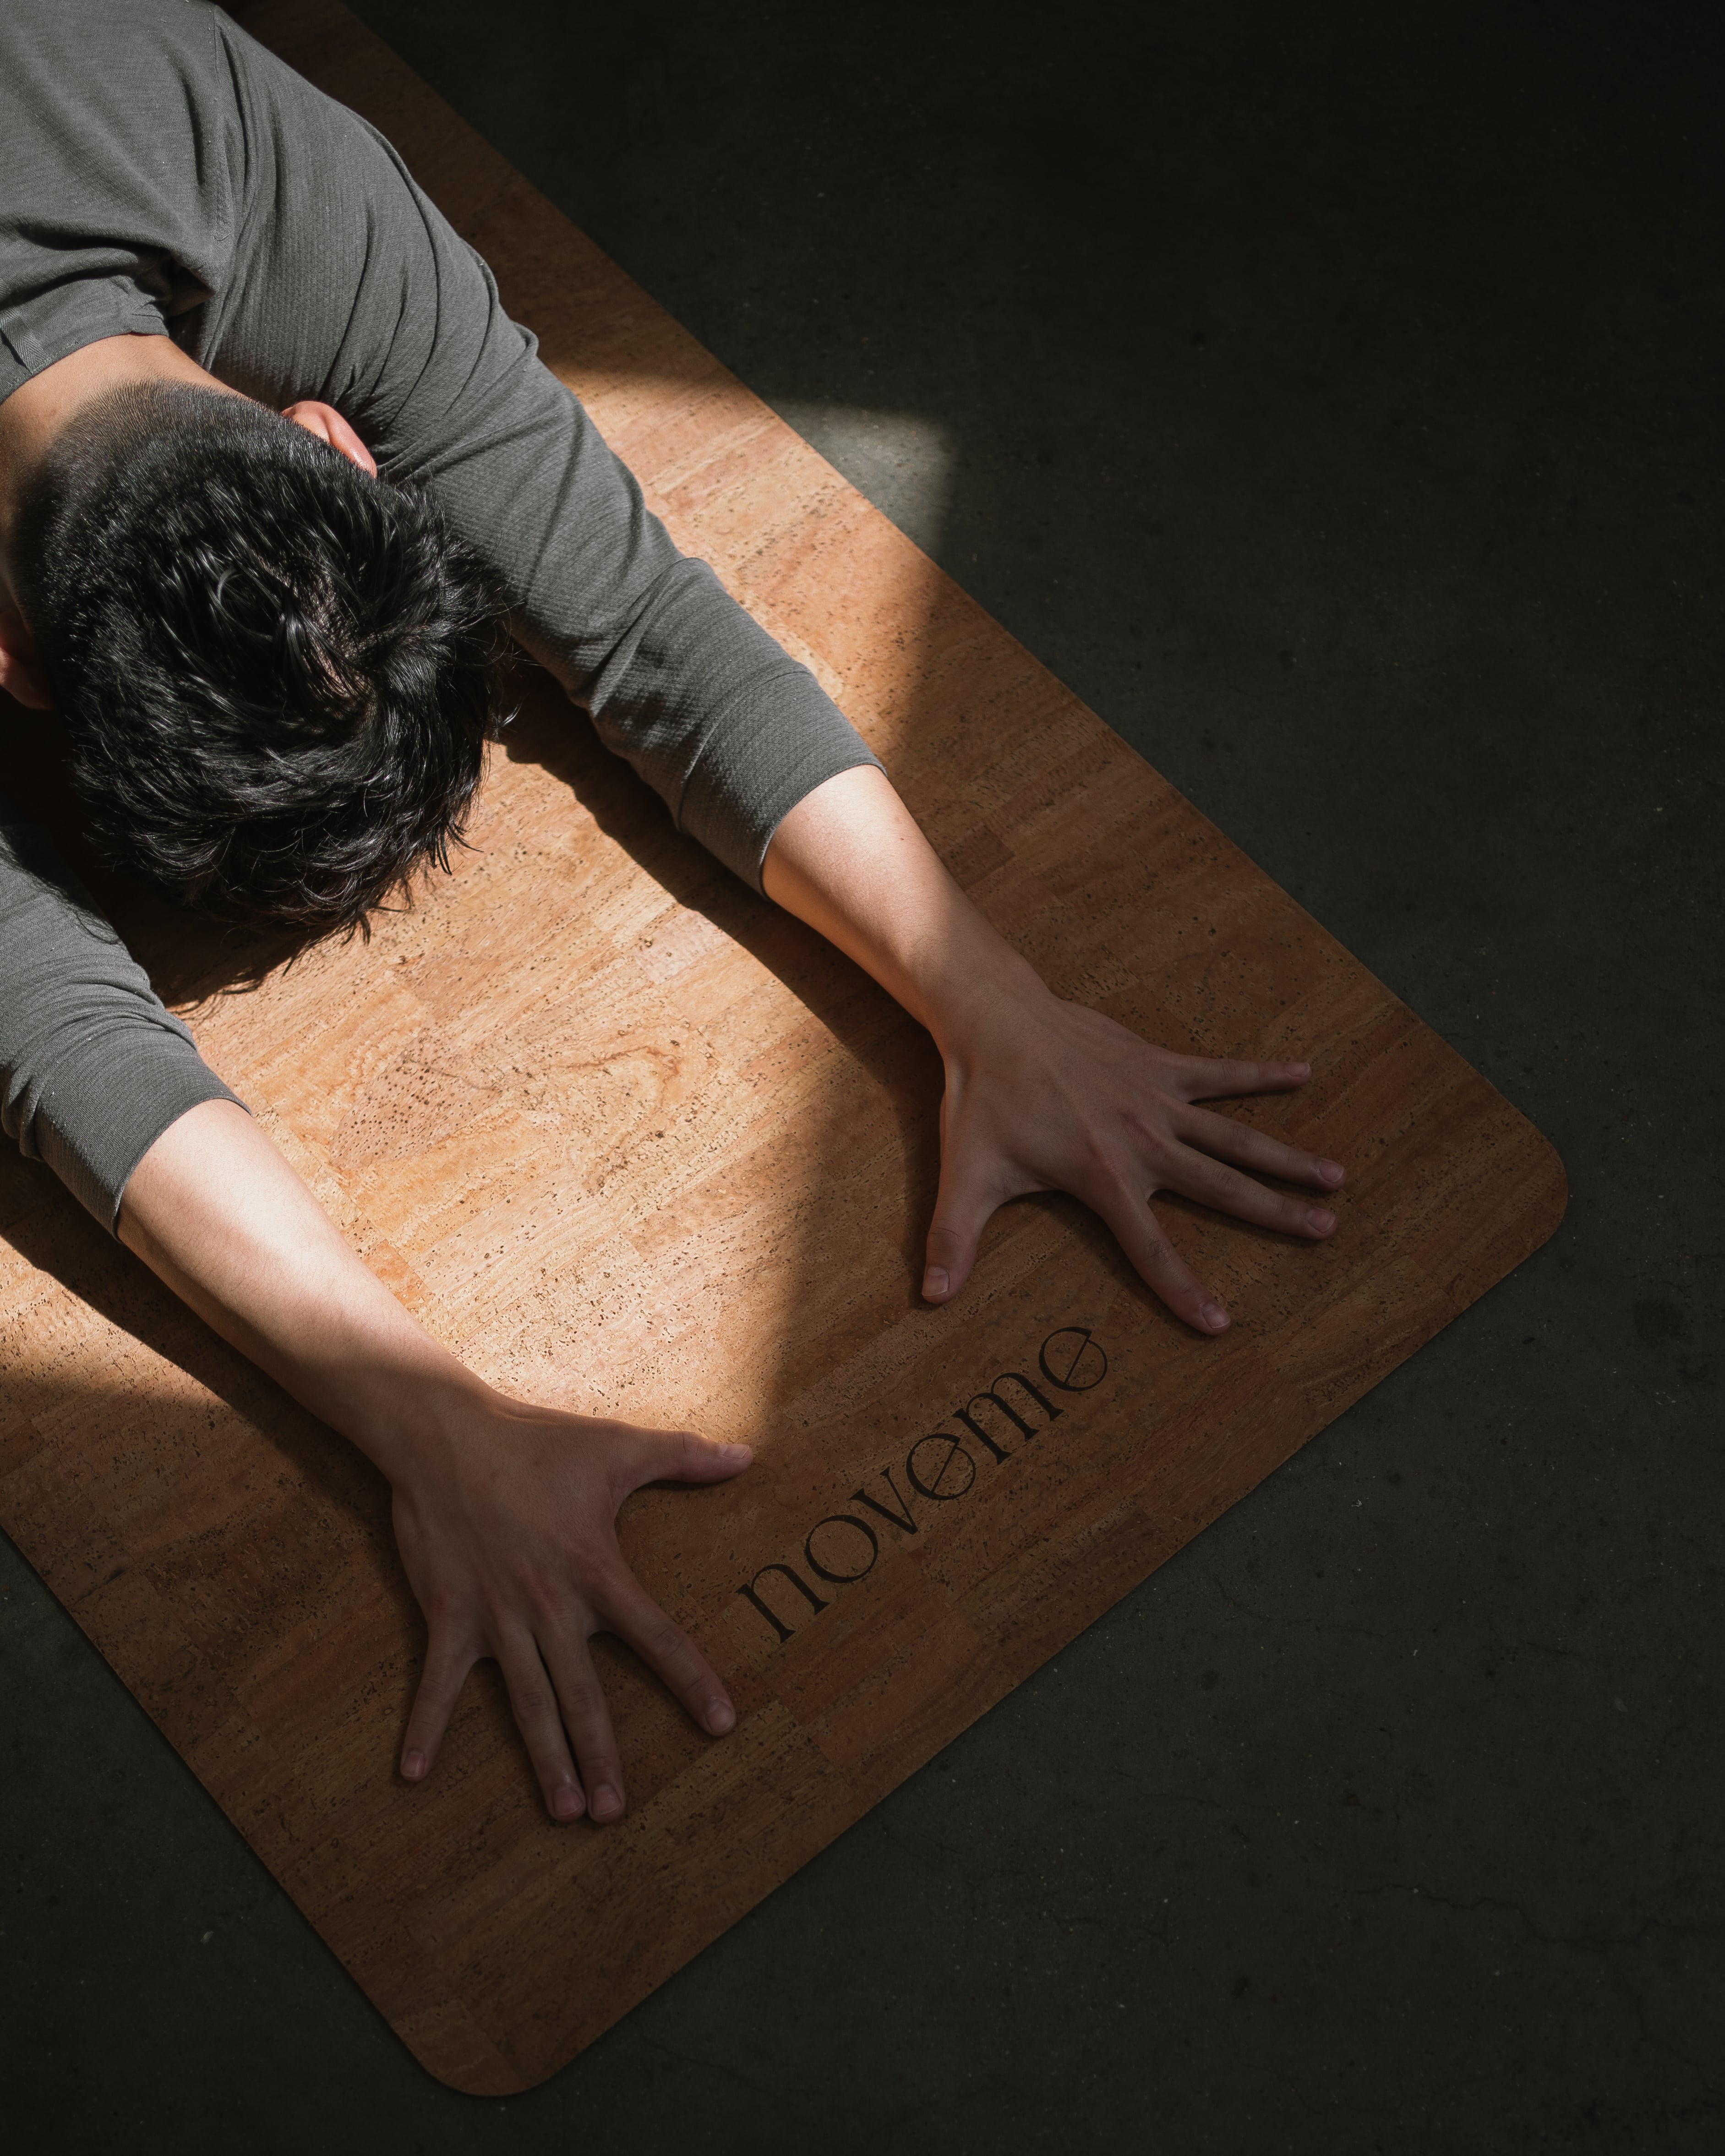 Nonslip yoga mats to make your flow smoother